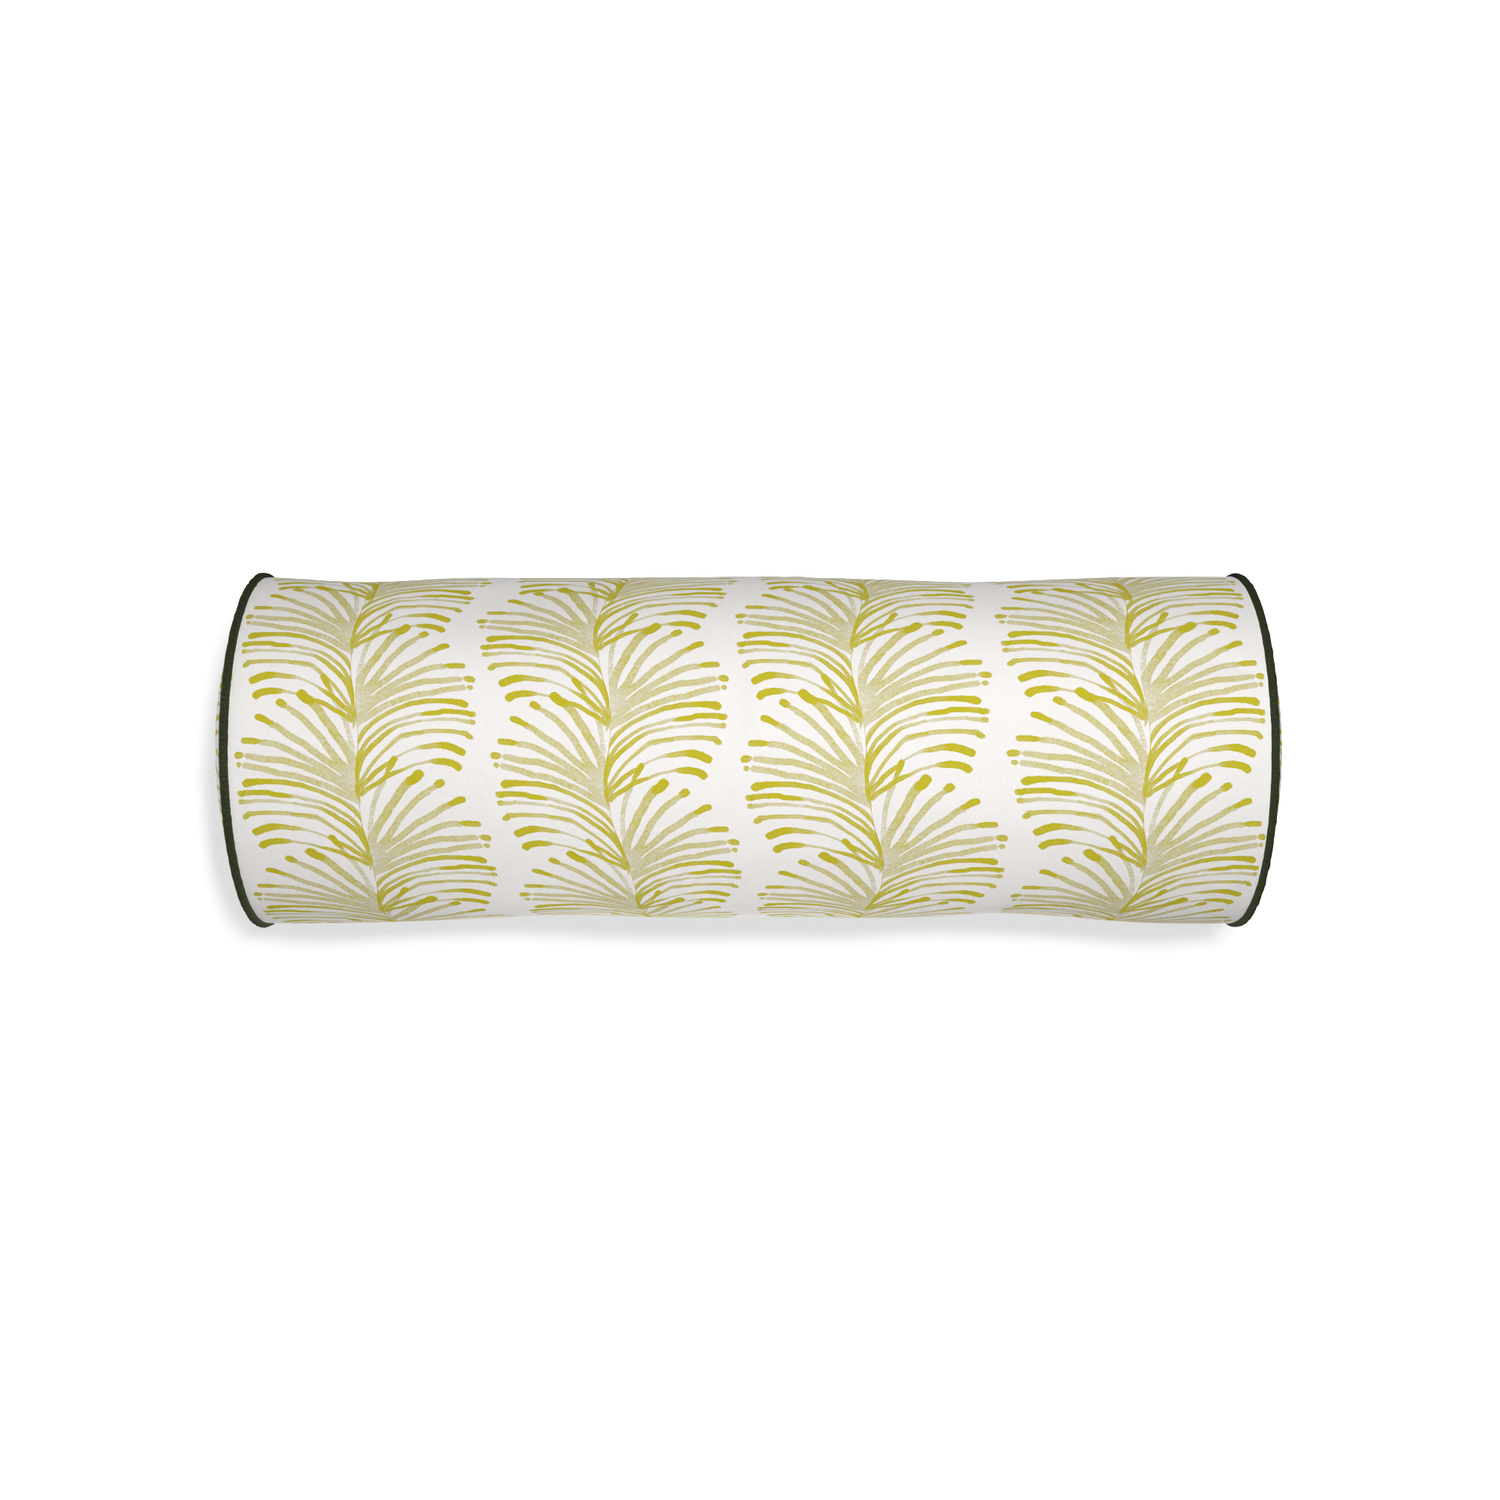 Bolster emma chartreuse custom yellow stripe chartreusepillow with f piping on white background